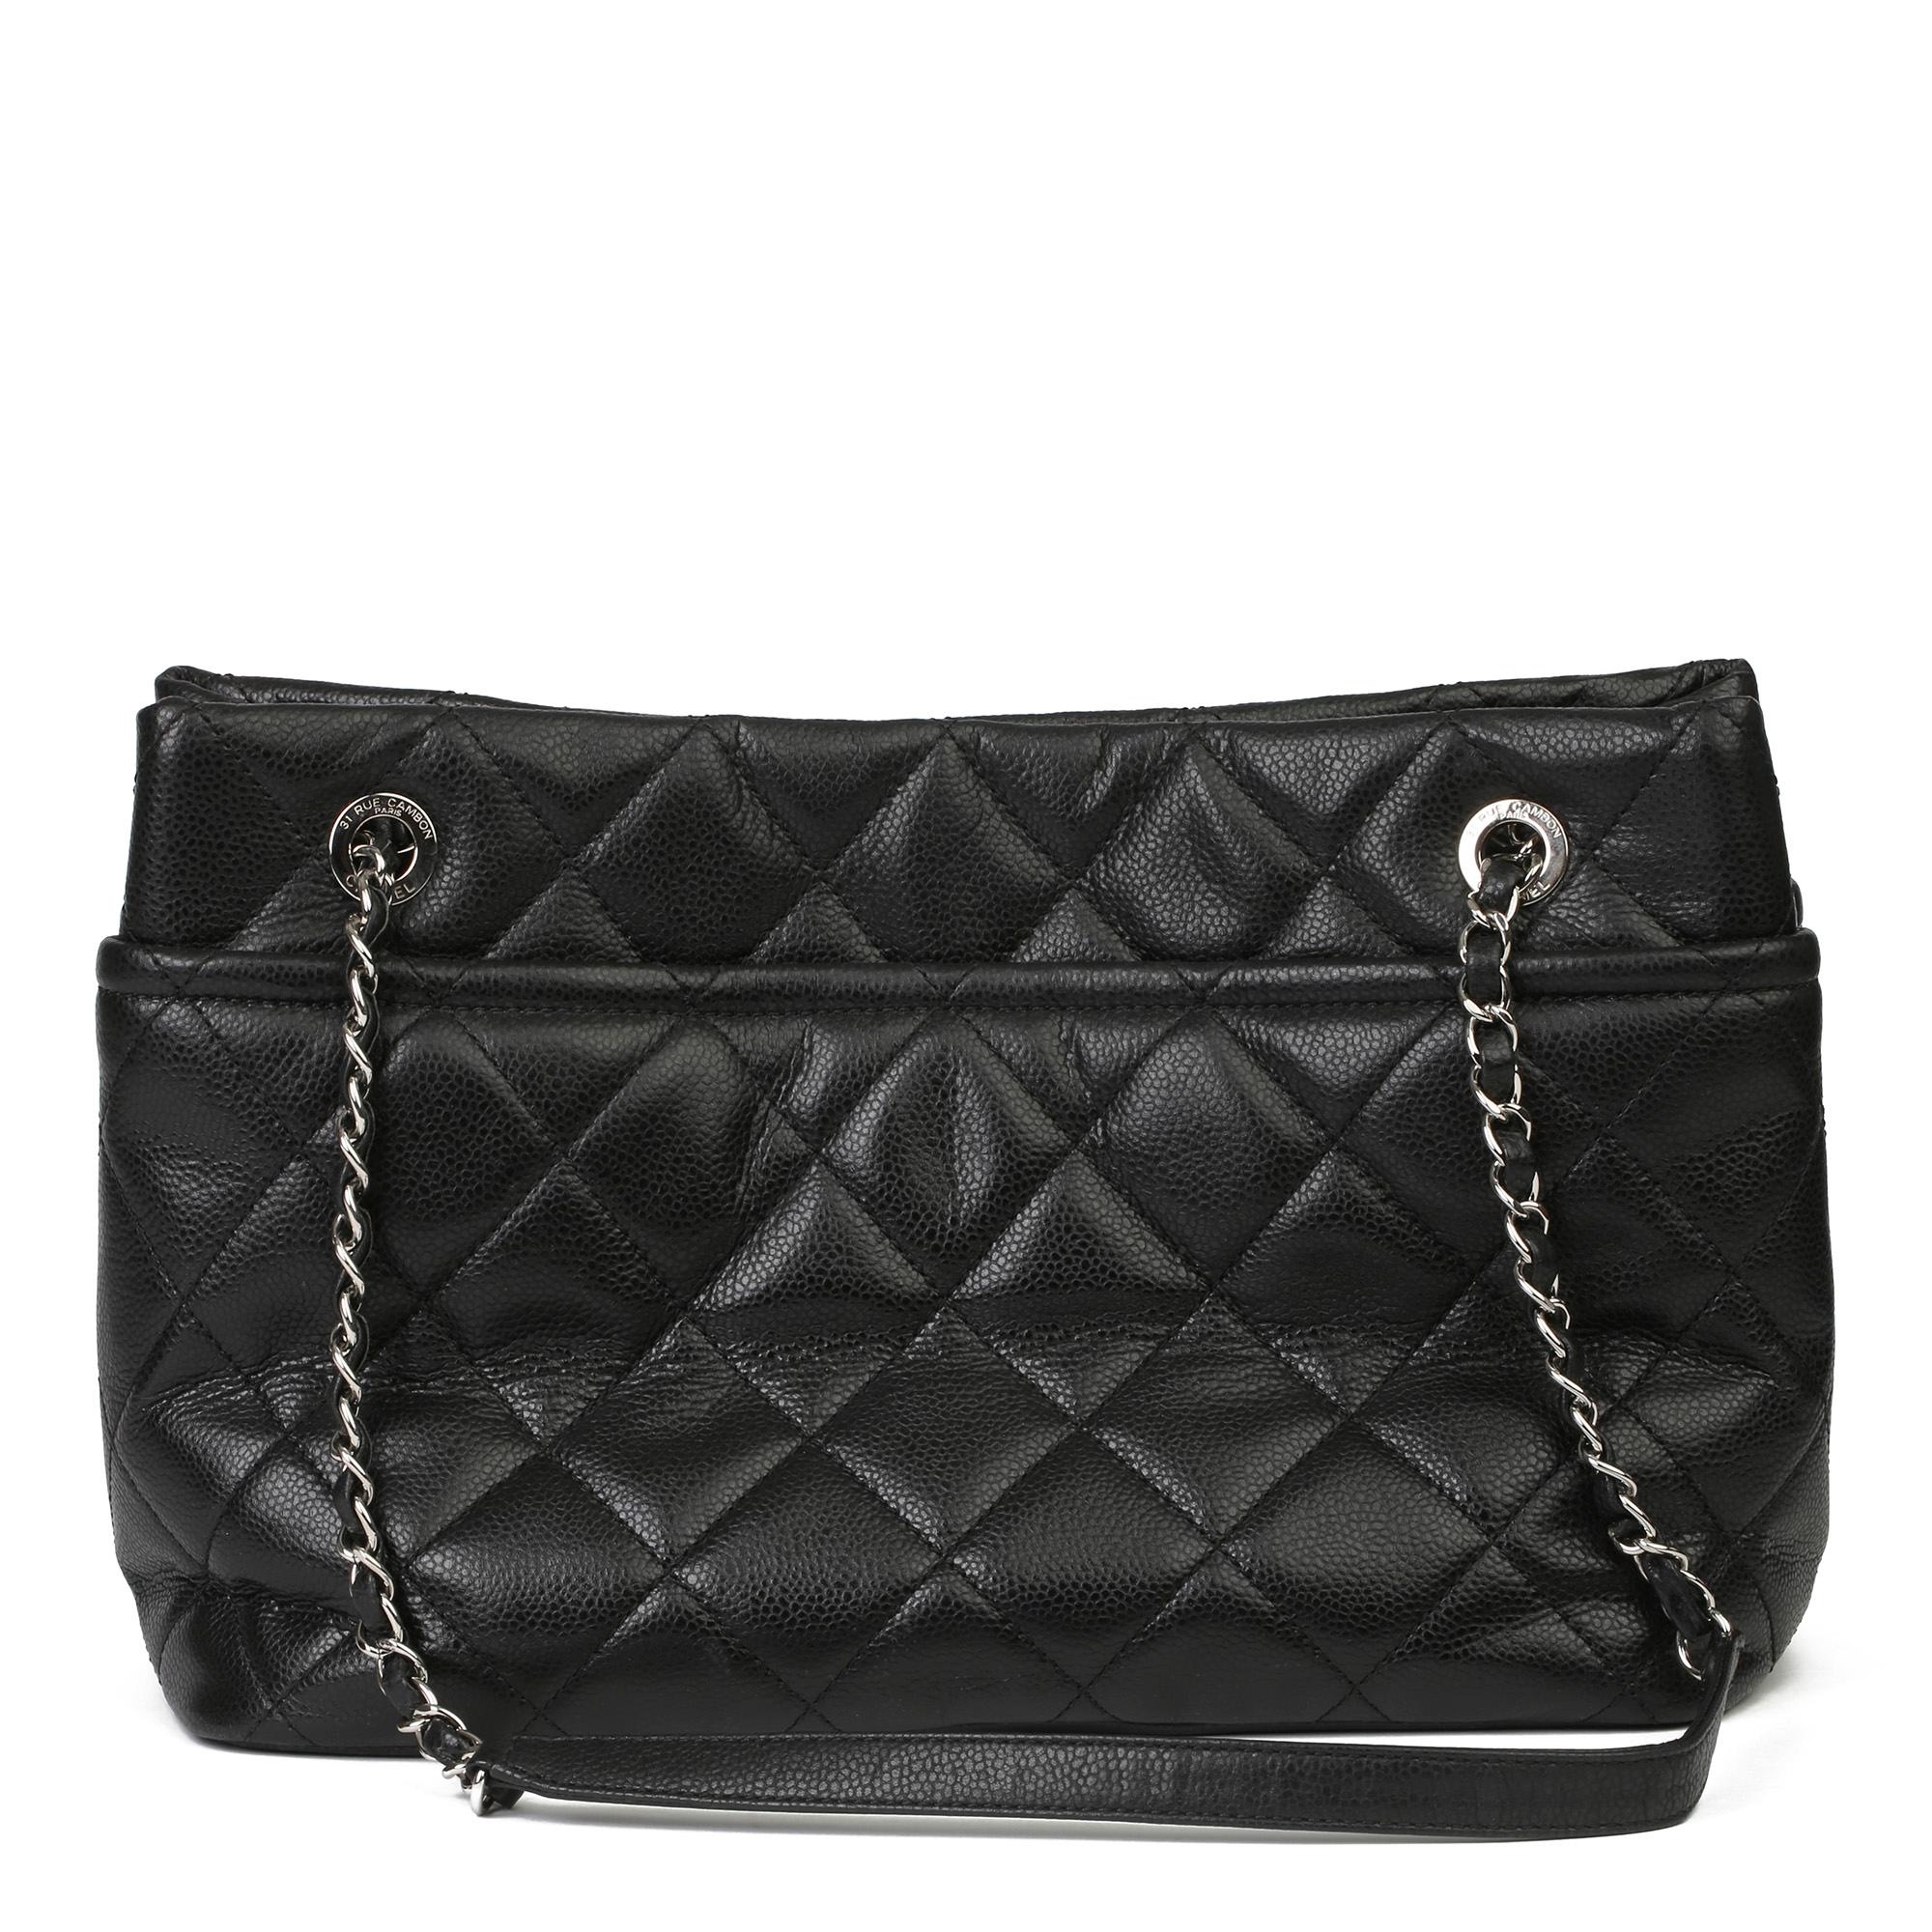 Women's 2012 Chanel Black Quilted Caviar Leather Timeless Shoulder Bag 